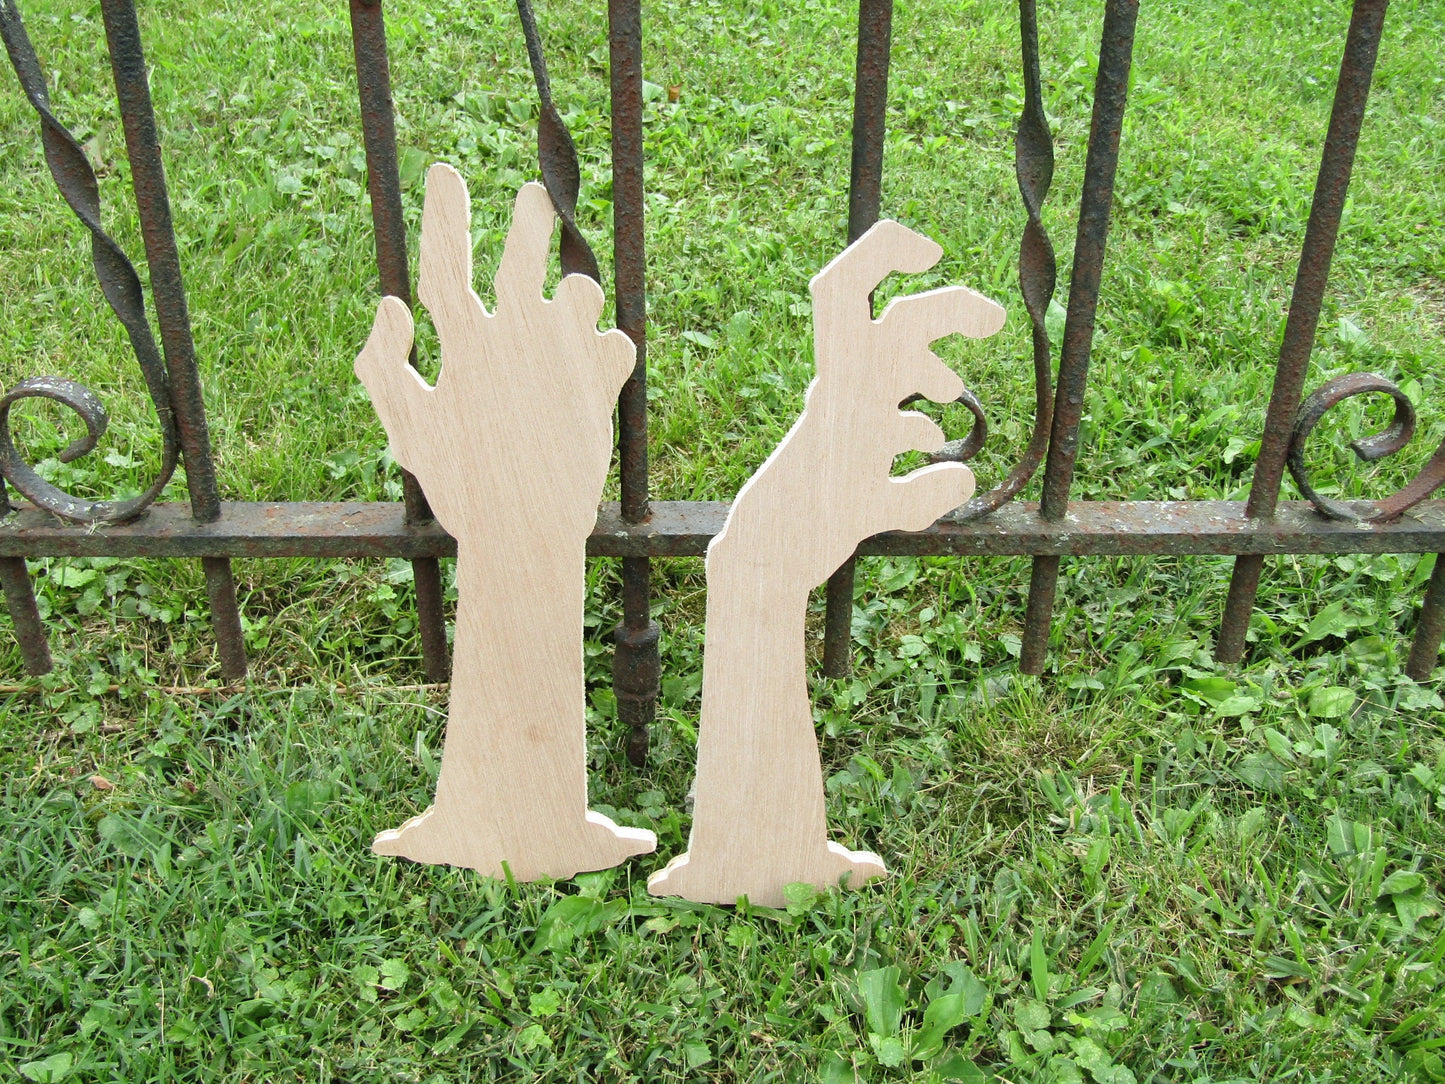 Zombie Hands Lawn Decoration Graveyard Prop Halloween Decor Spooky Scary Haunted House Wooden Laser Cut Silhouette Natural Autumn Dead